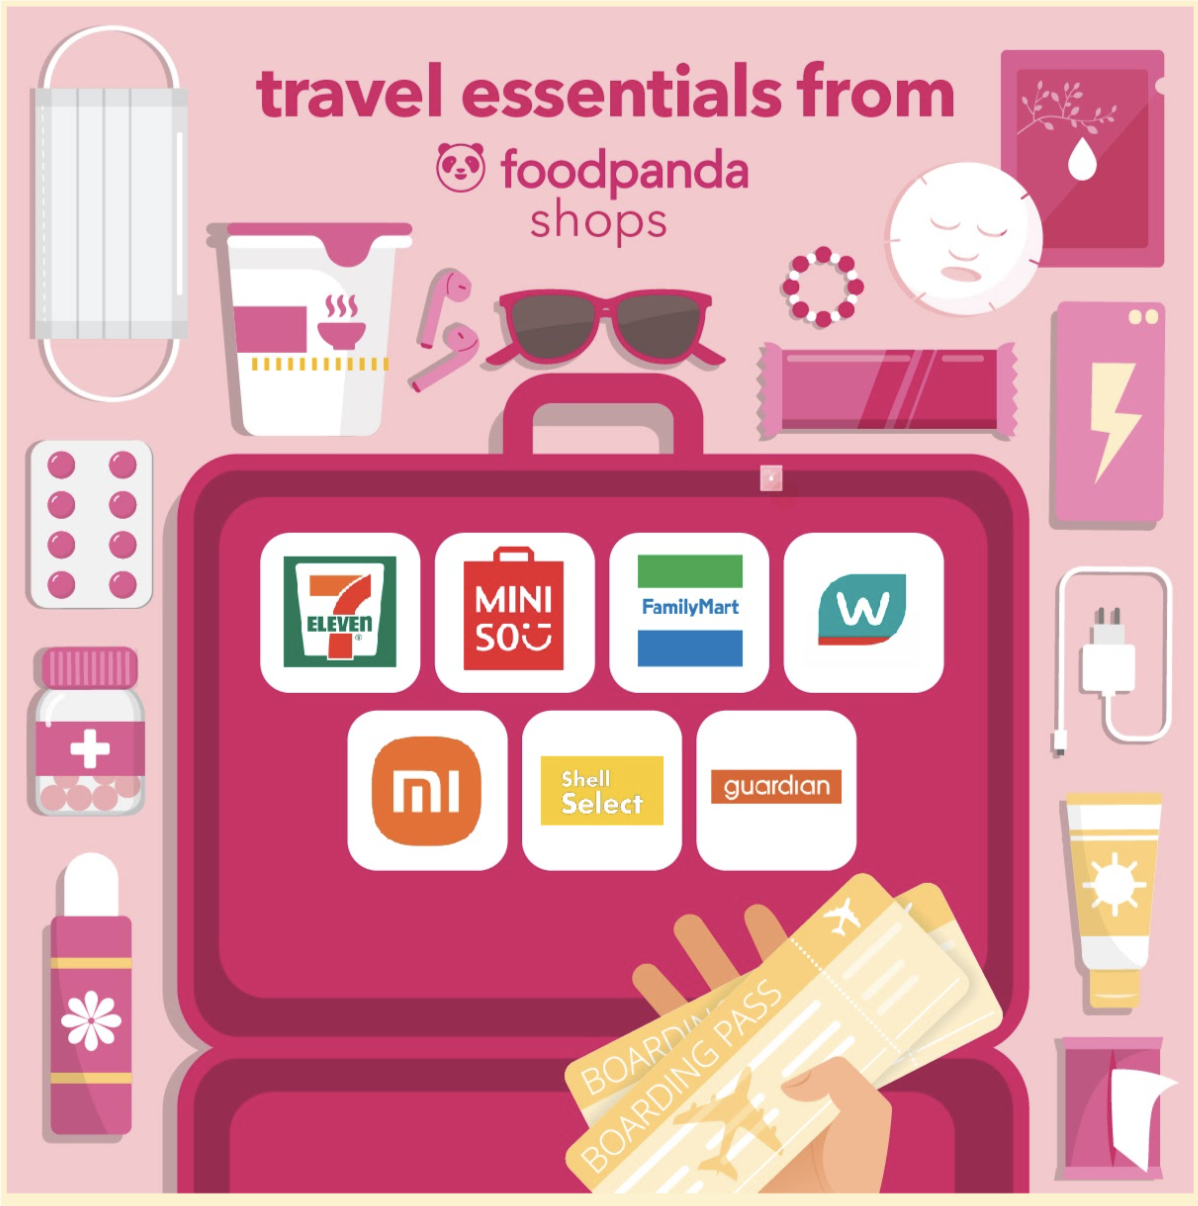 Image - Year end travel must-haves: more than 2 million items to discover  on foodpanda shops for the Ultimate Fuss-Free Packing List